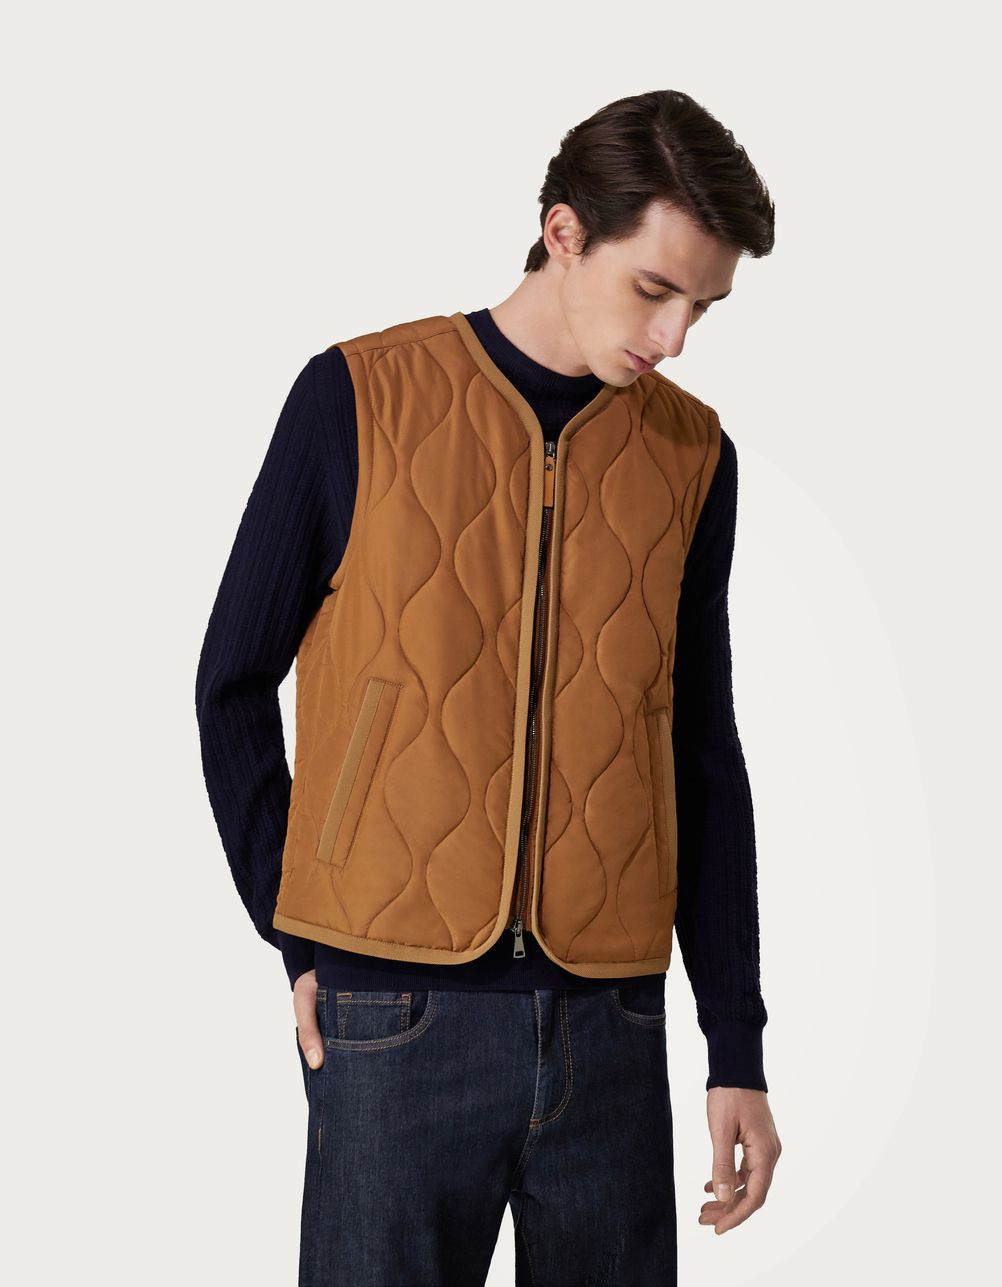 Quilted waistcoat in cinnamon technical fabric